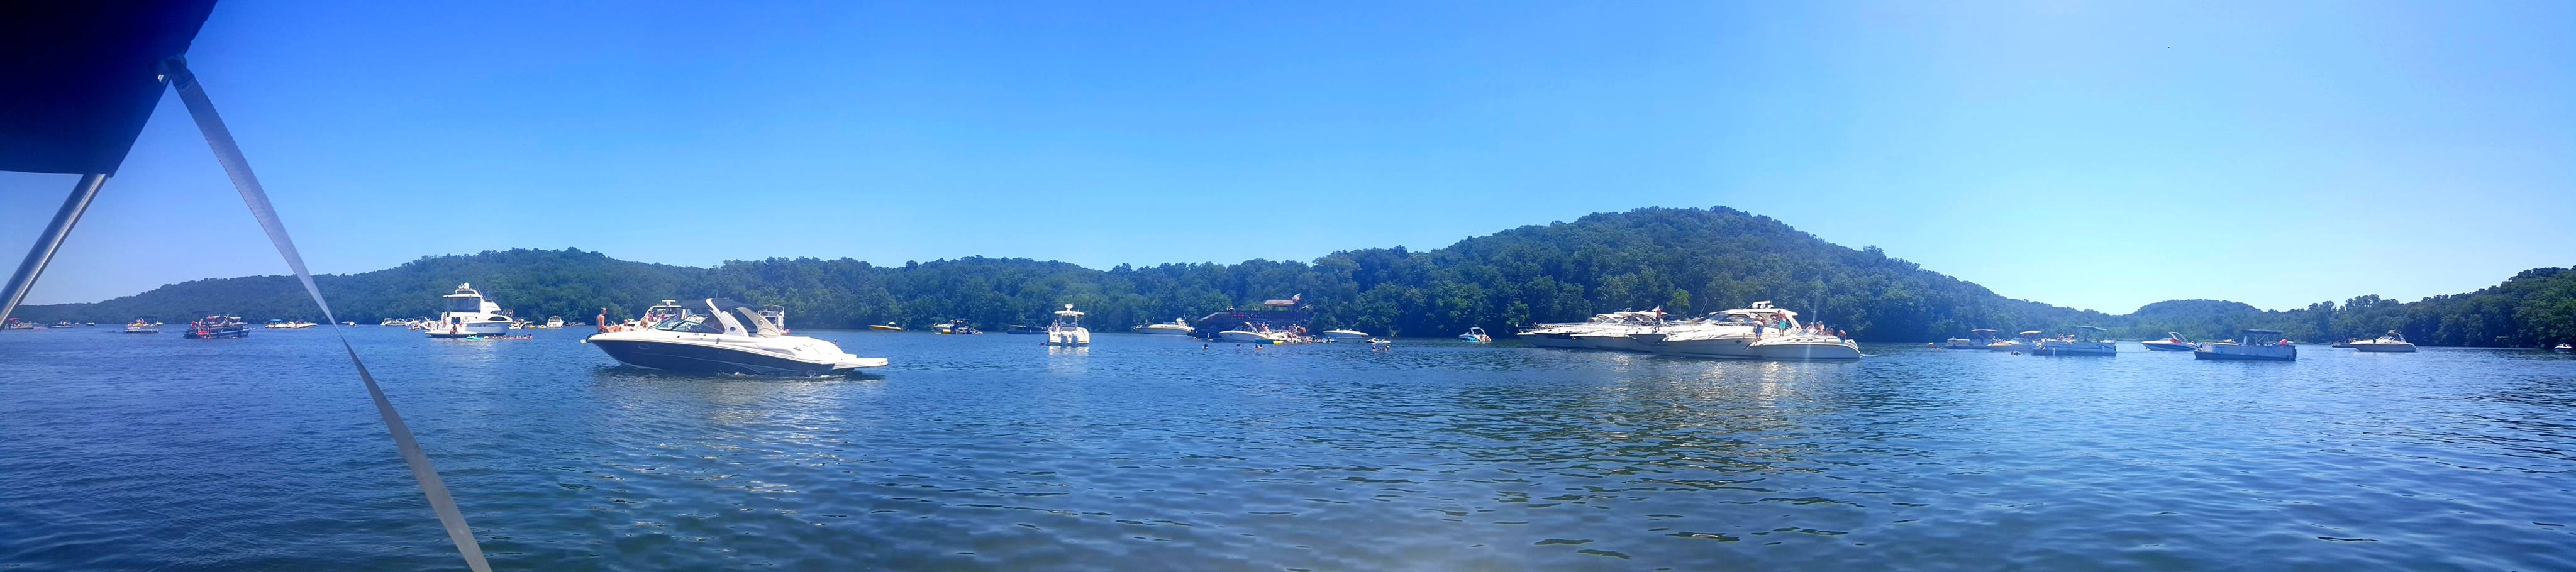 Lake of the Ozarks Review: ALL of it.